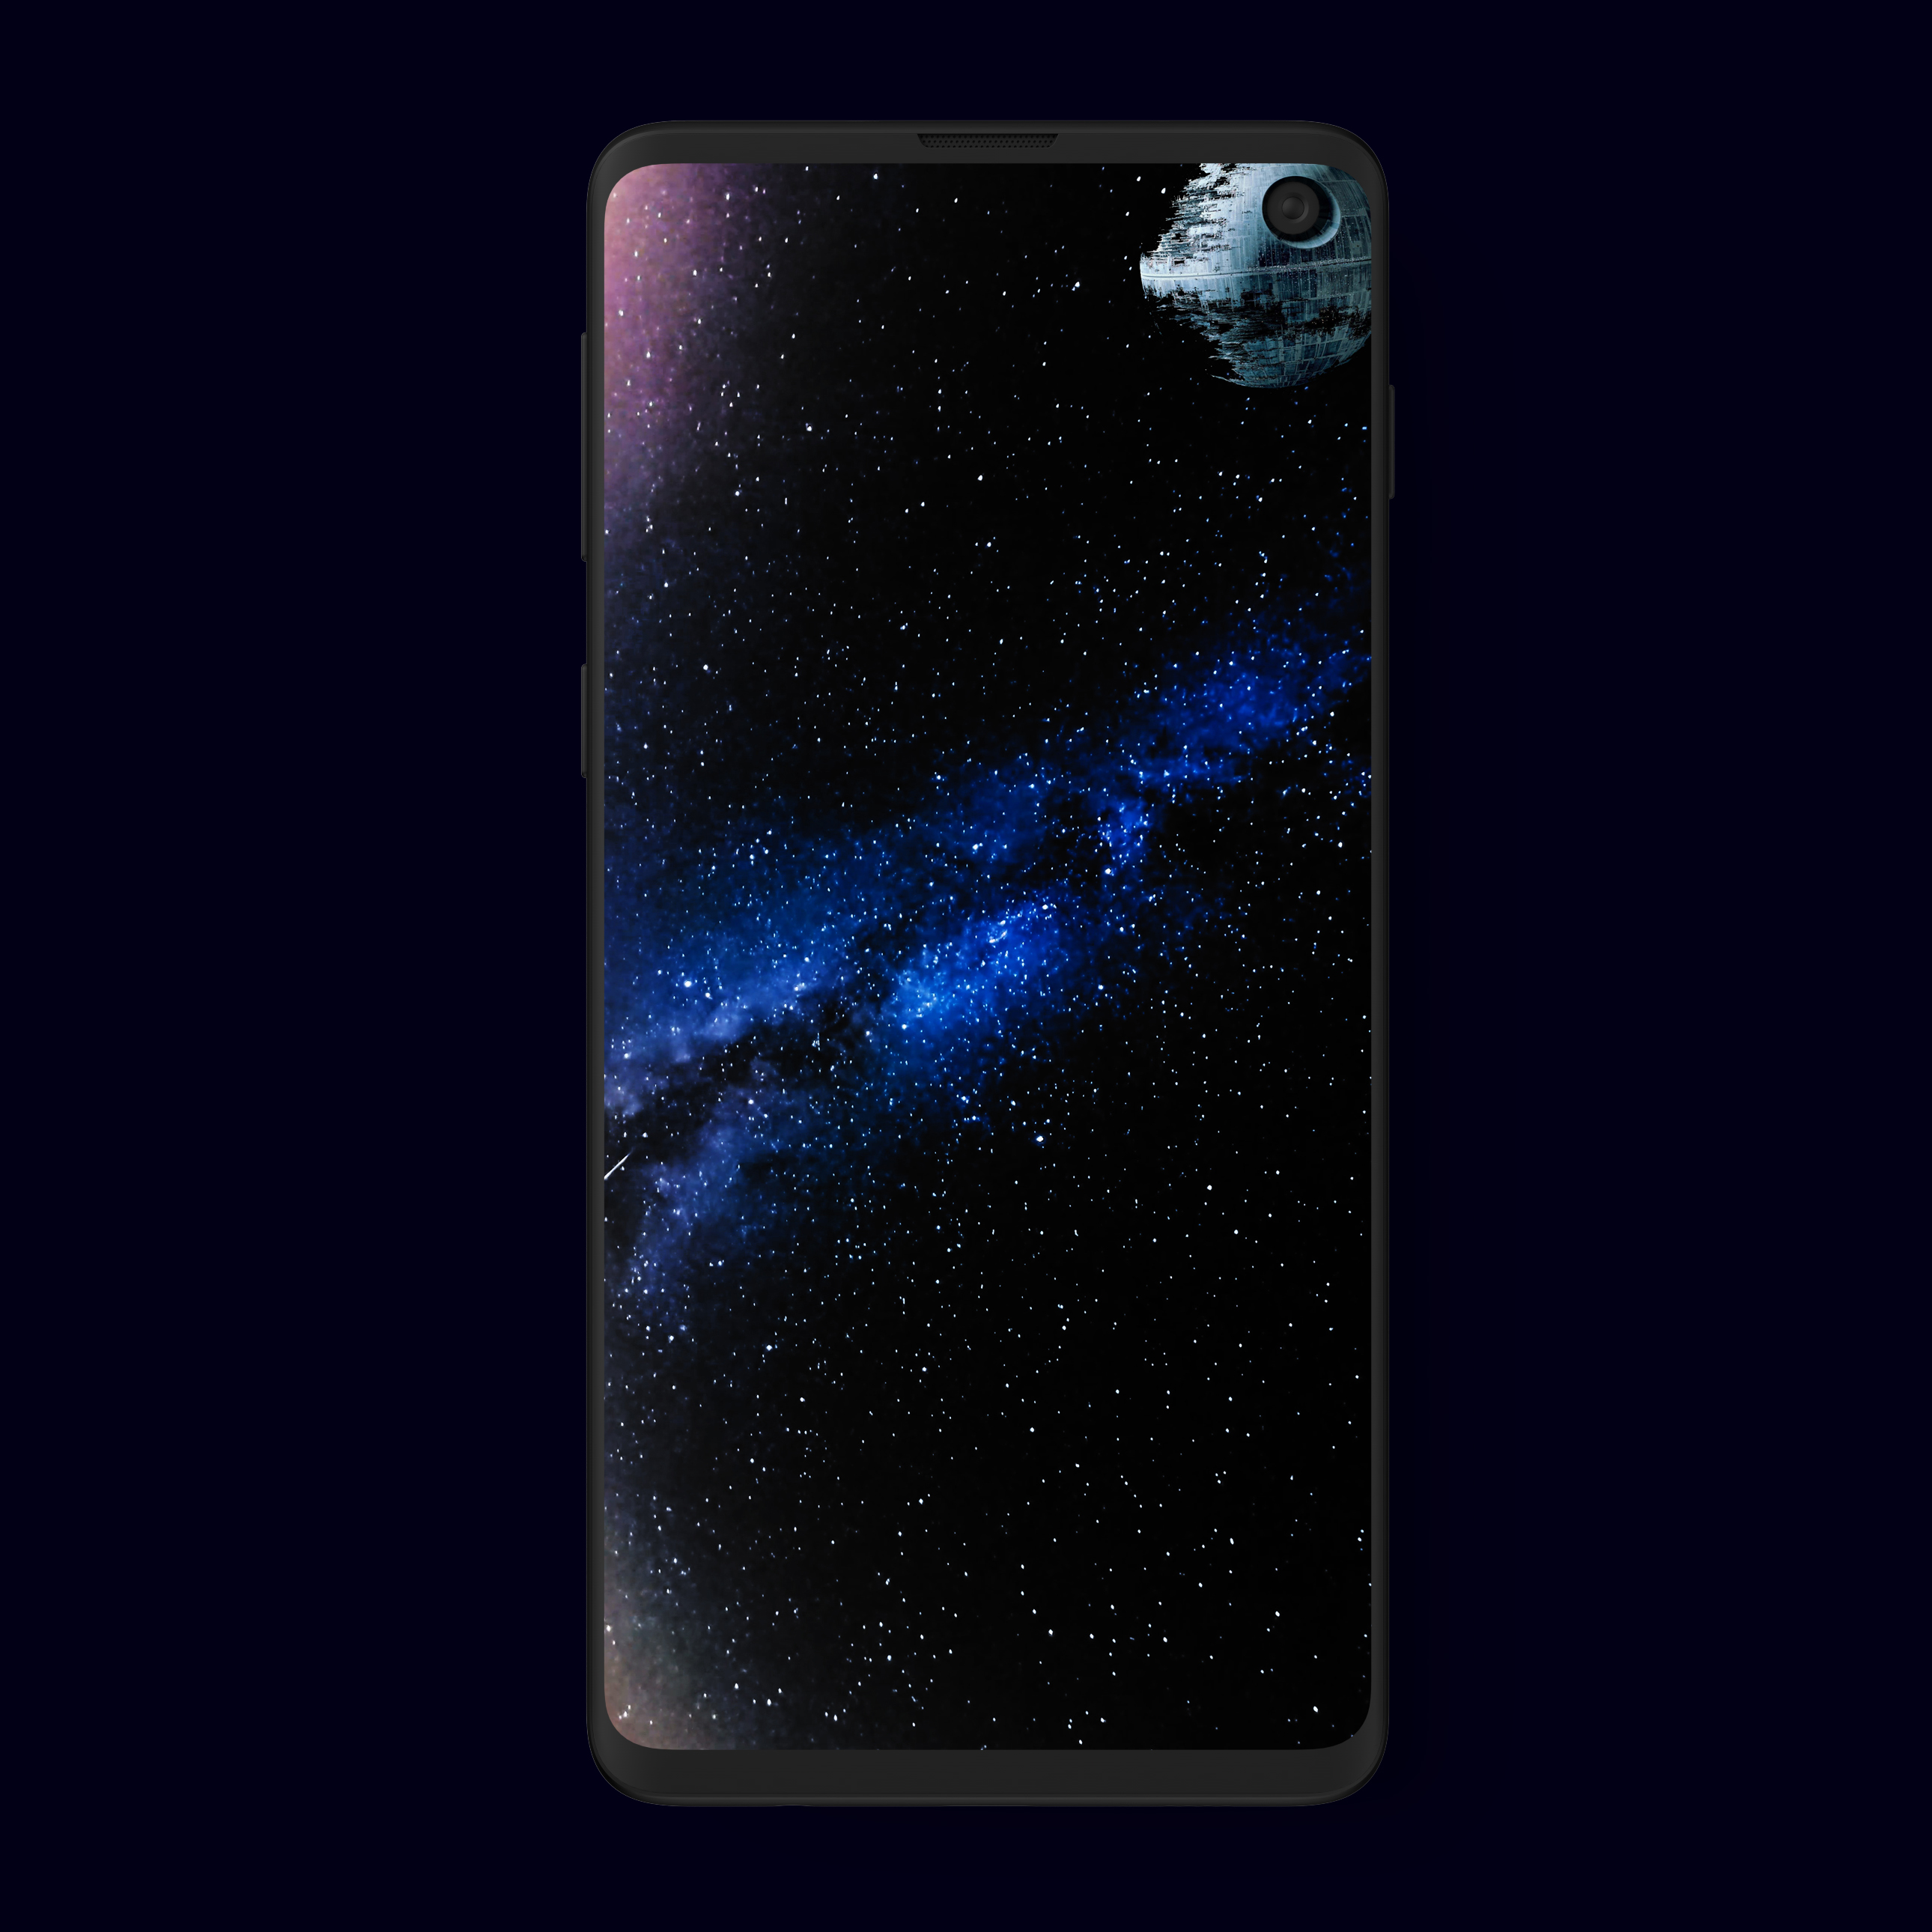 samsung galaxy wallpaper,mobile phone case,mobile phone accessories,gadget,galaxy,astronomical object